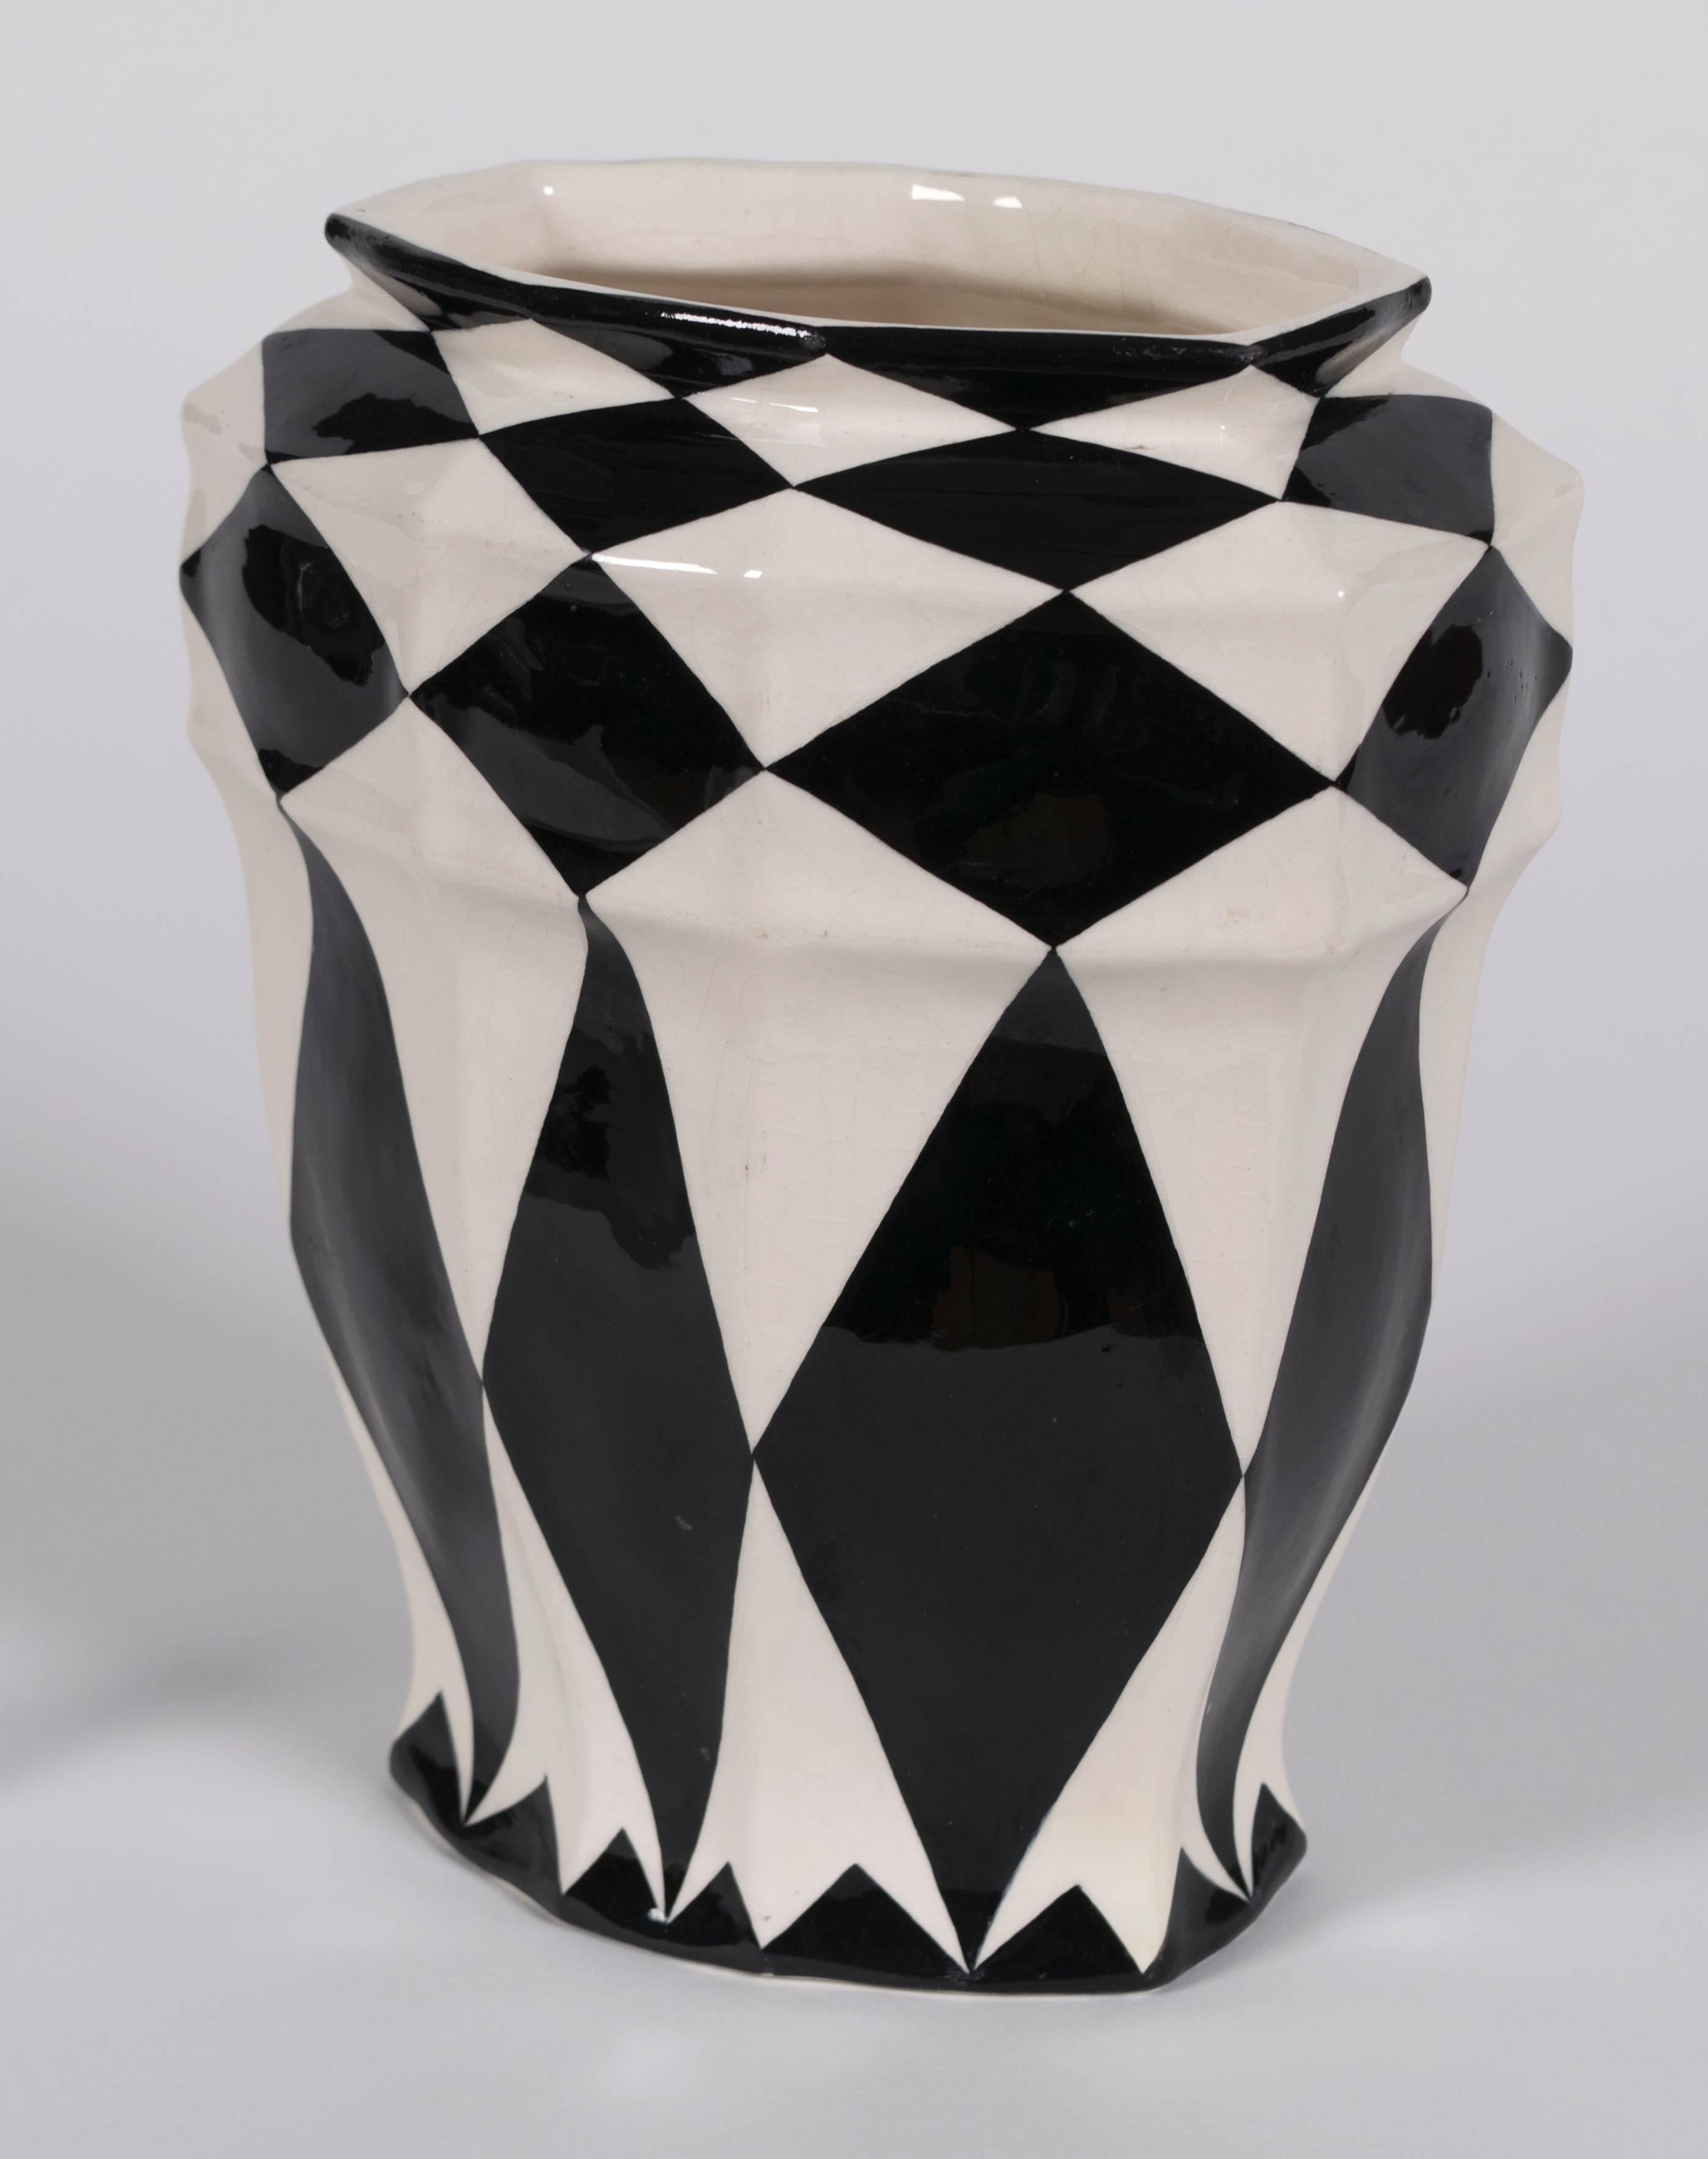 Austrian secession period ceramic vase by Keramos, circa 1925. Dramatic hand-painted black and white geometric form.

Keramos was a Viennese art pottery manufactory founded in 1910. The company was a silver medal winner at the Paris Art Exhibition